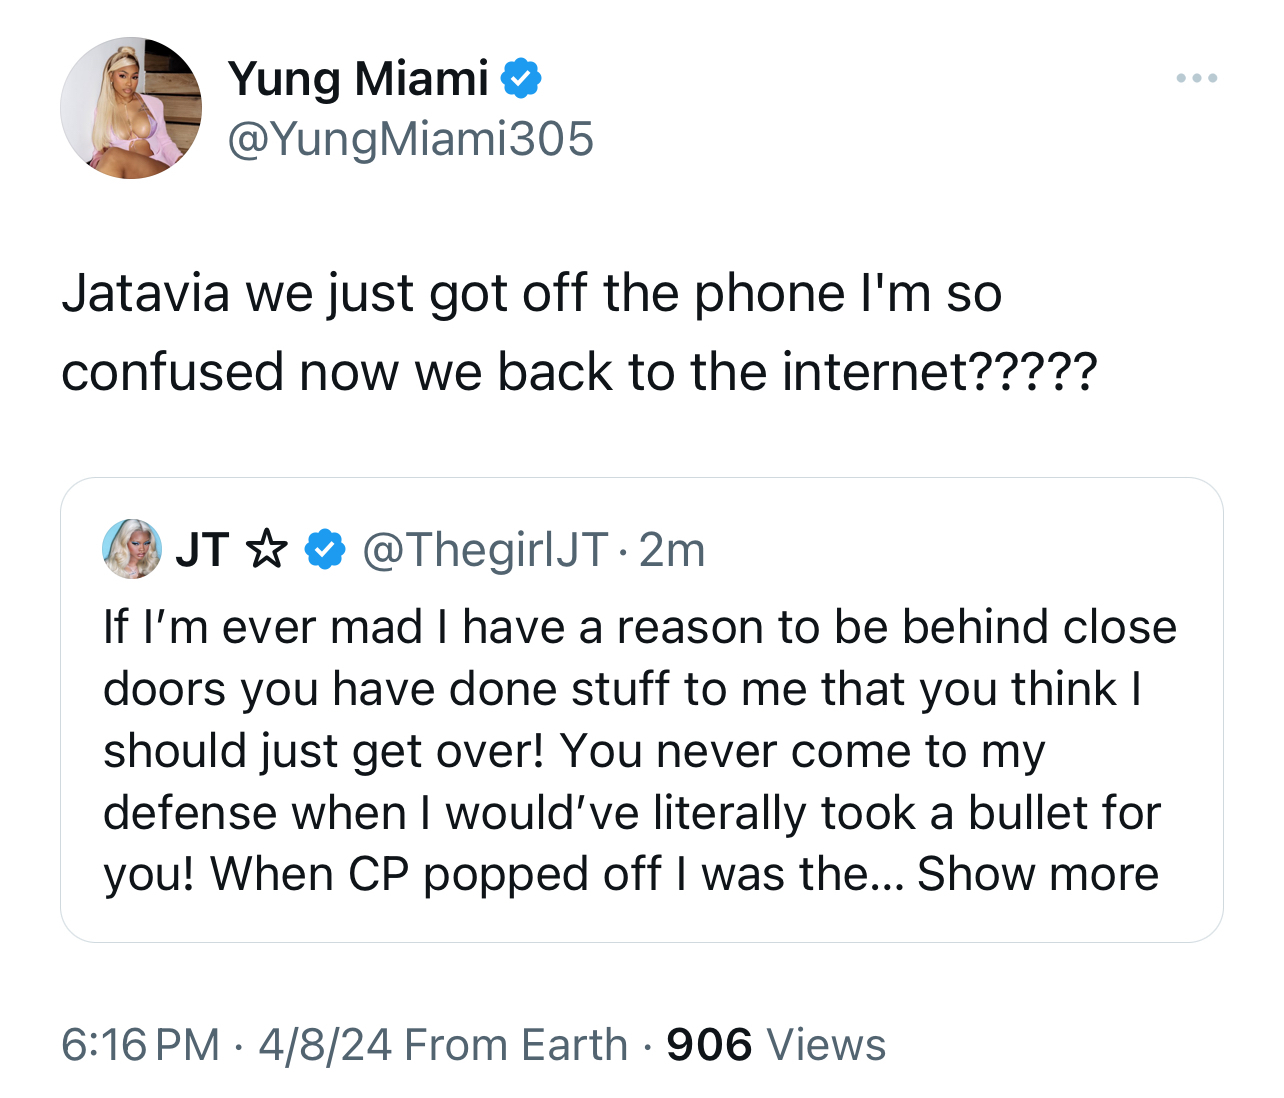 Two tweets from Yung Miami and JT discussing a confusing phone call and defending against internet criticism